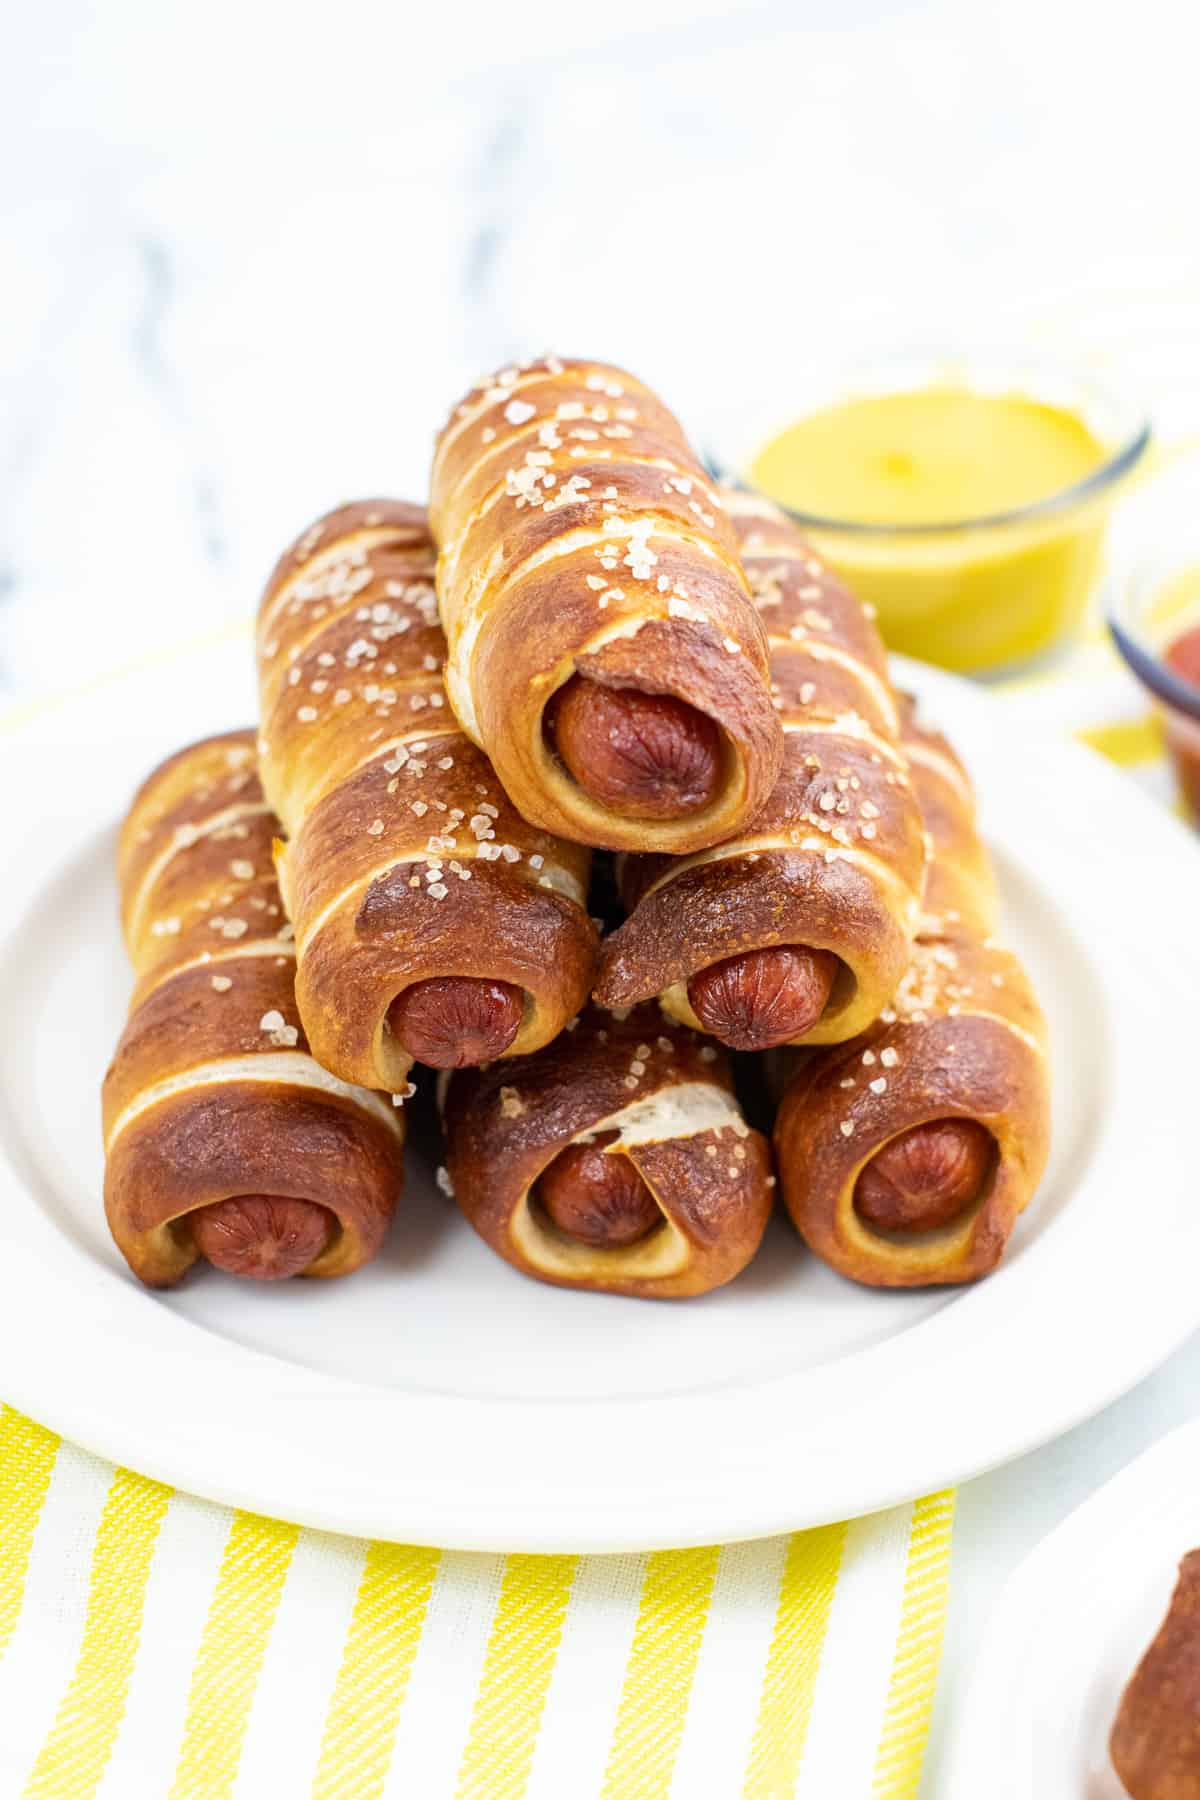 pretzel wrapped hot dogs stacked in a pyramid shape on white plate with bowl of mustard in the background.